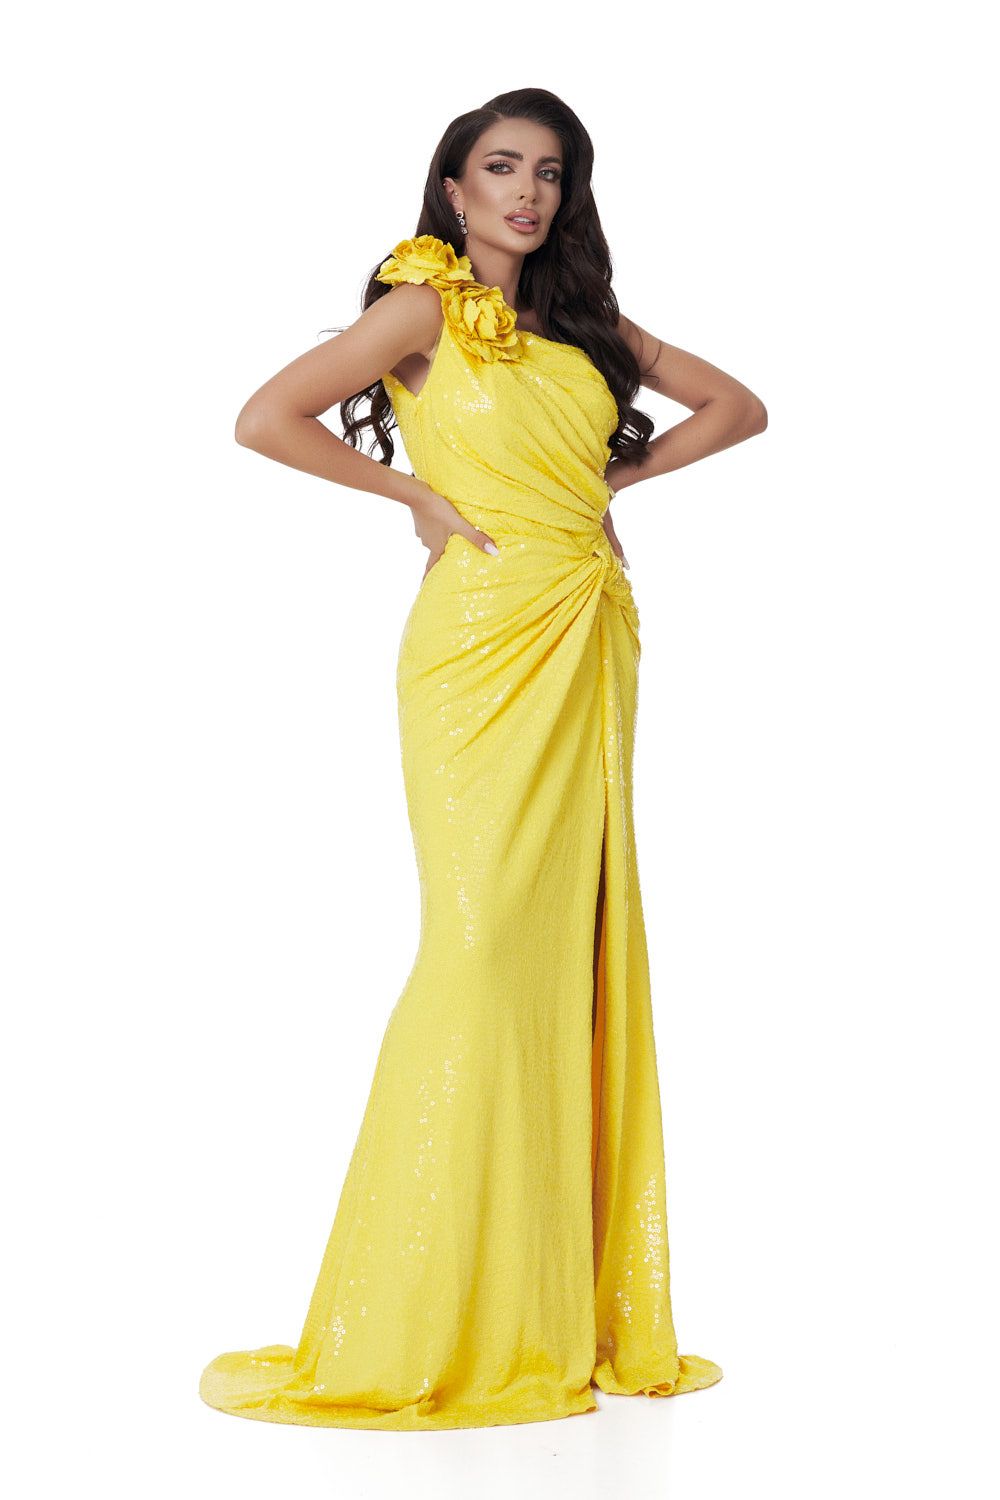 Long yellow sequin dress for women by Manrique Bogas